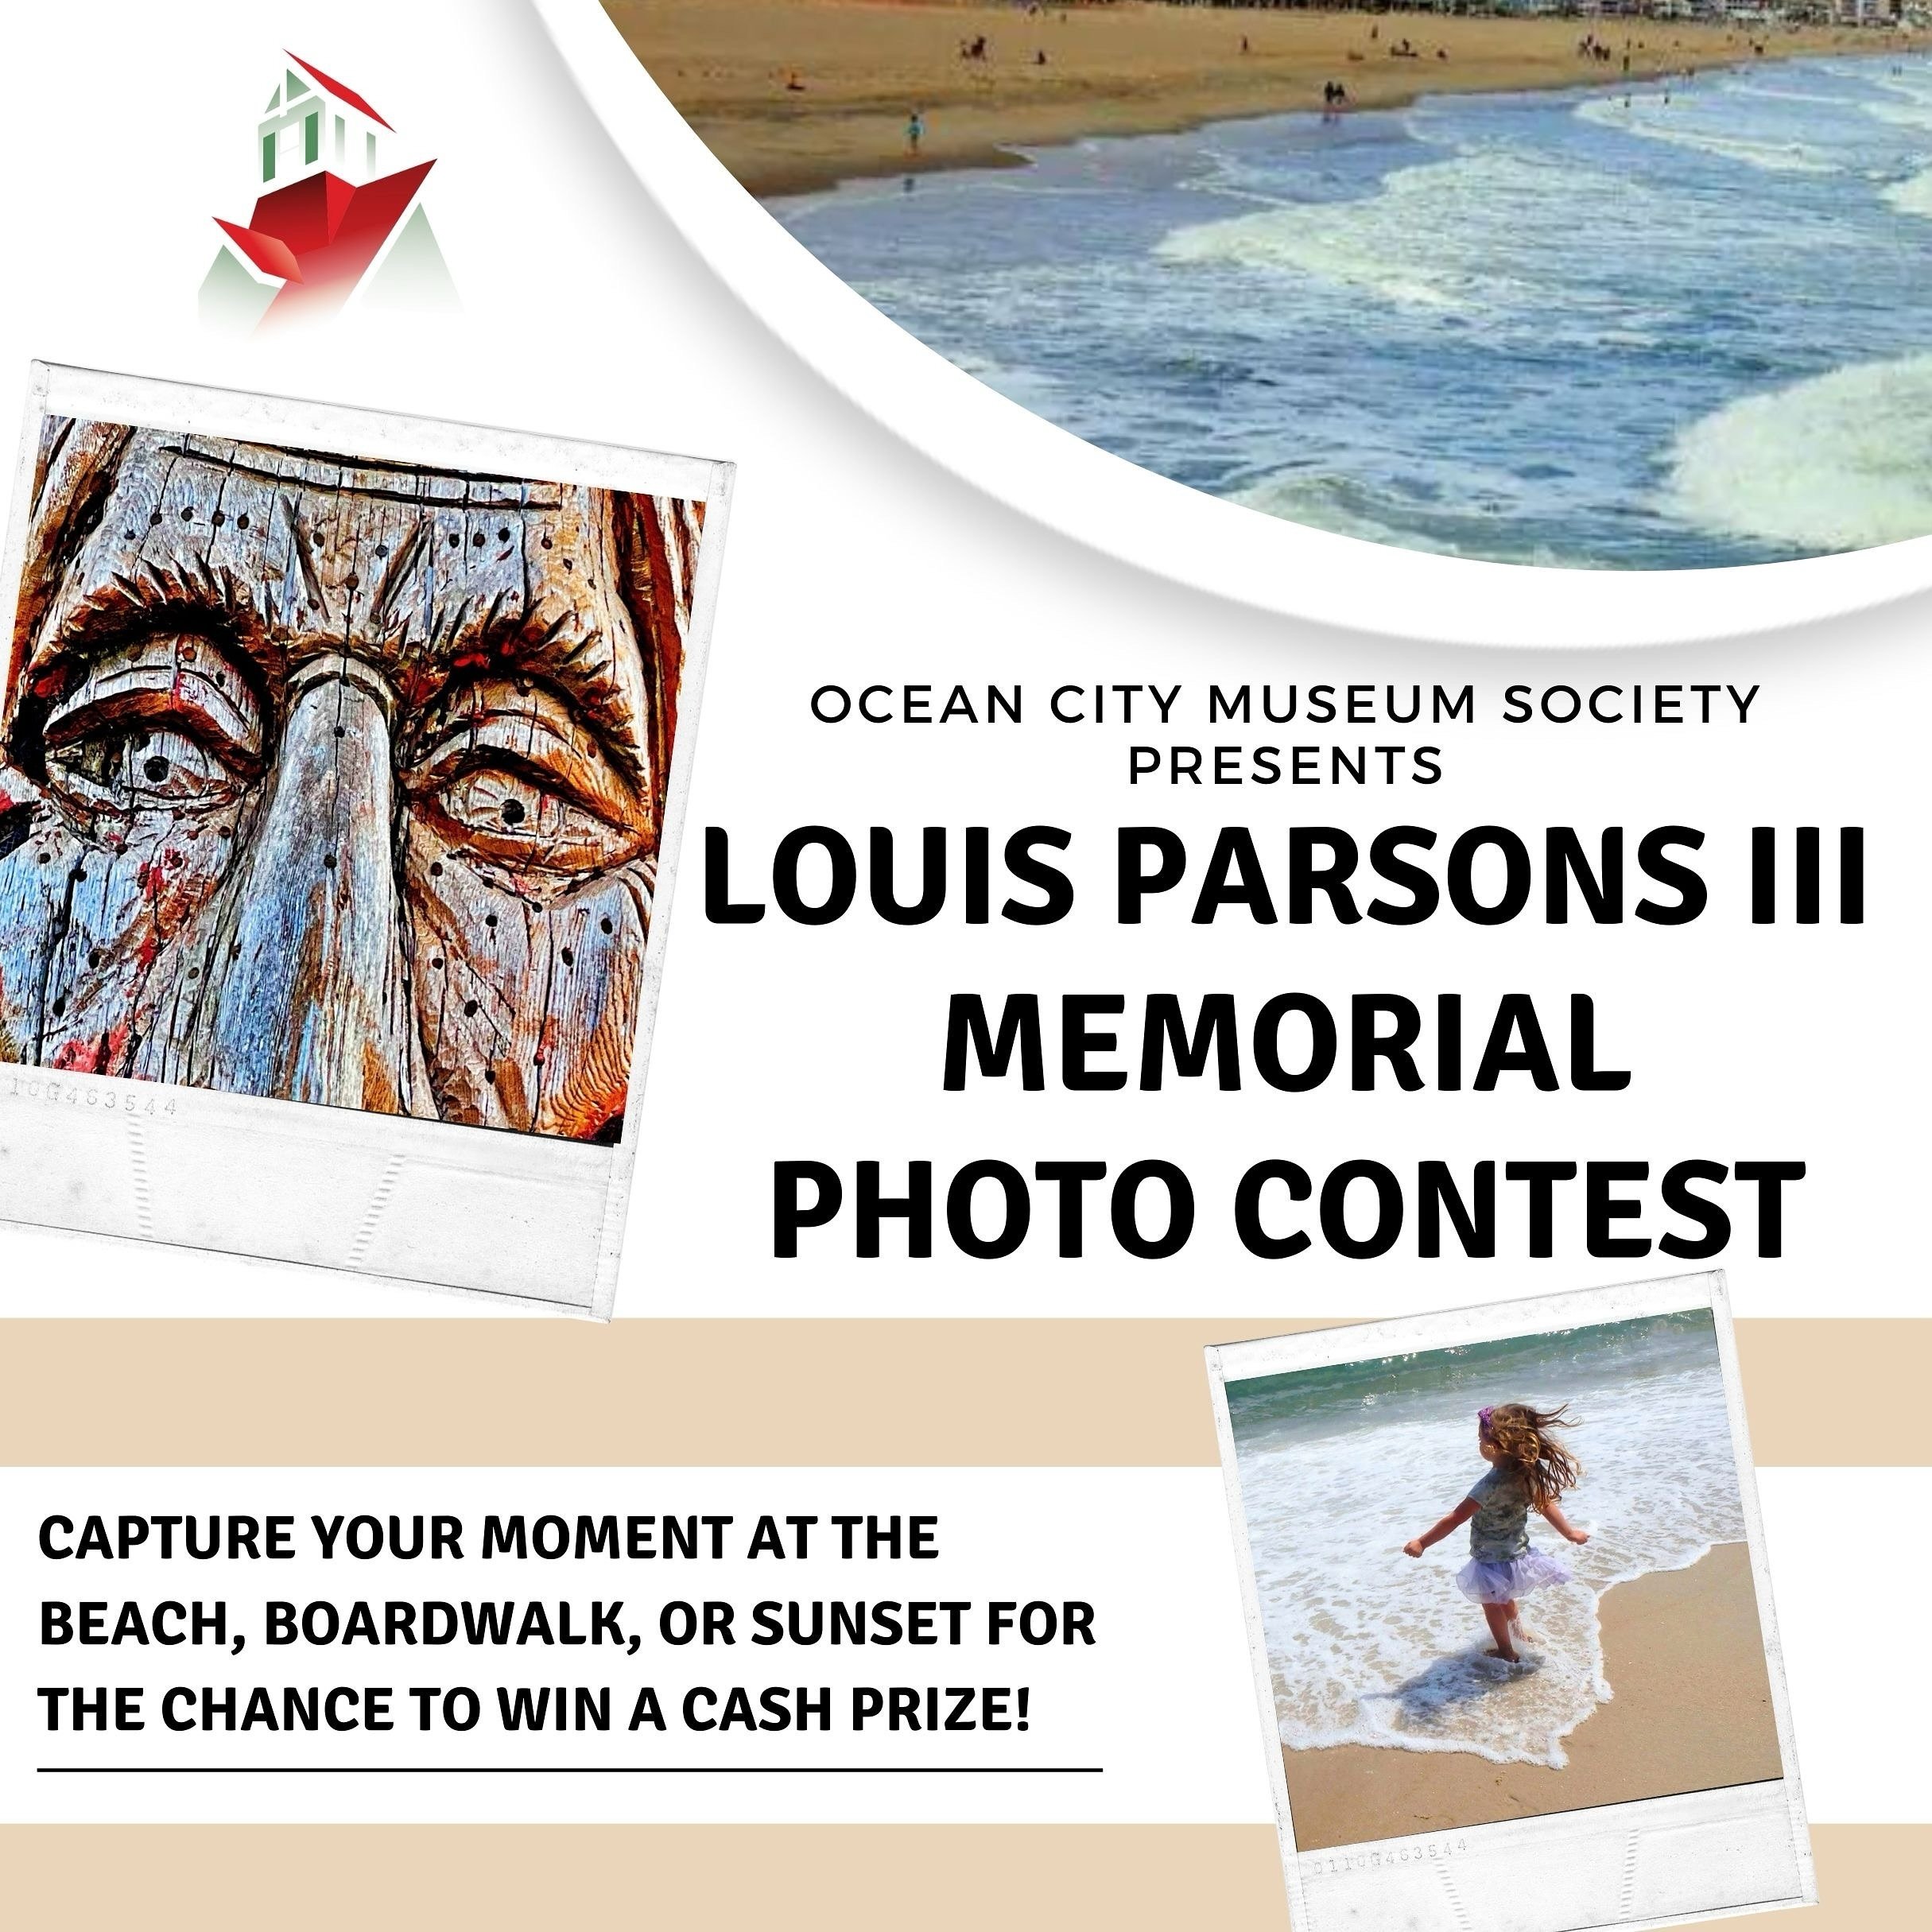 Whether snapping a photo of the sunset or the entire family, there is no better place than Ocean City, Maryland, to capture stunning and memorable images. The Ocean City Life-Saving Station Museum&rsquo;s Louis Parsons III Memorial Annual Photo Conte